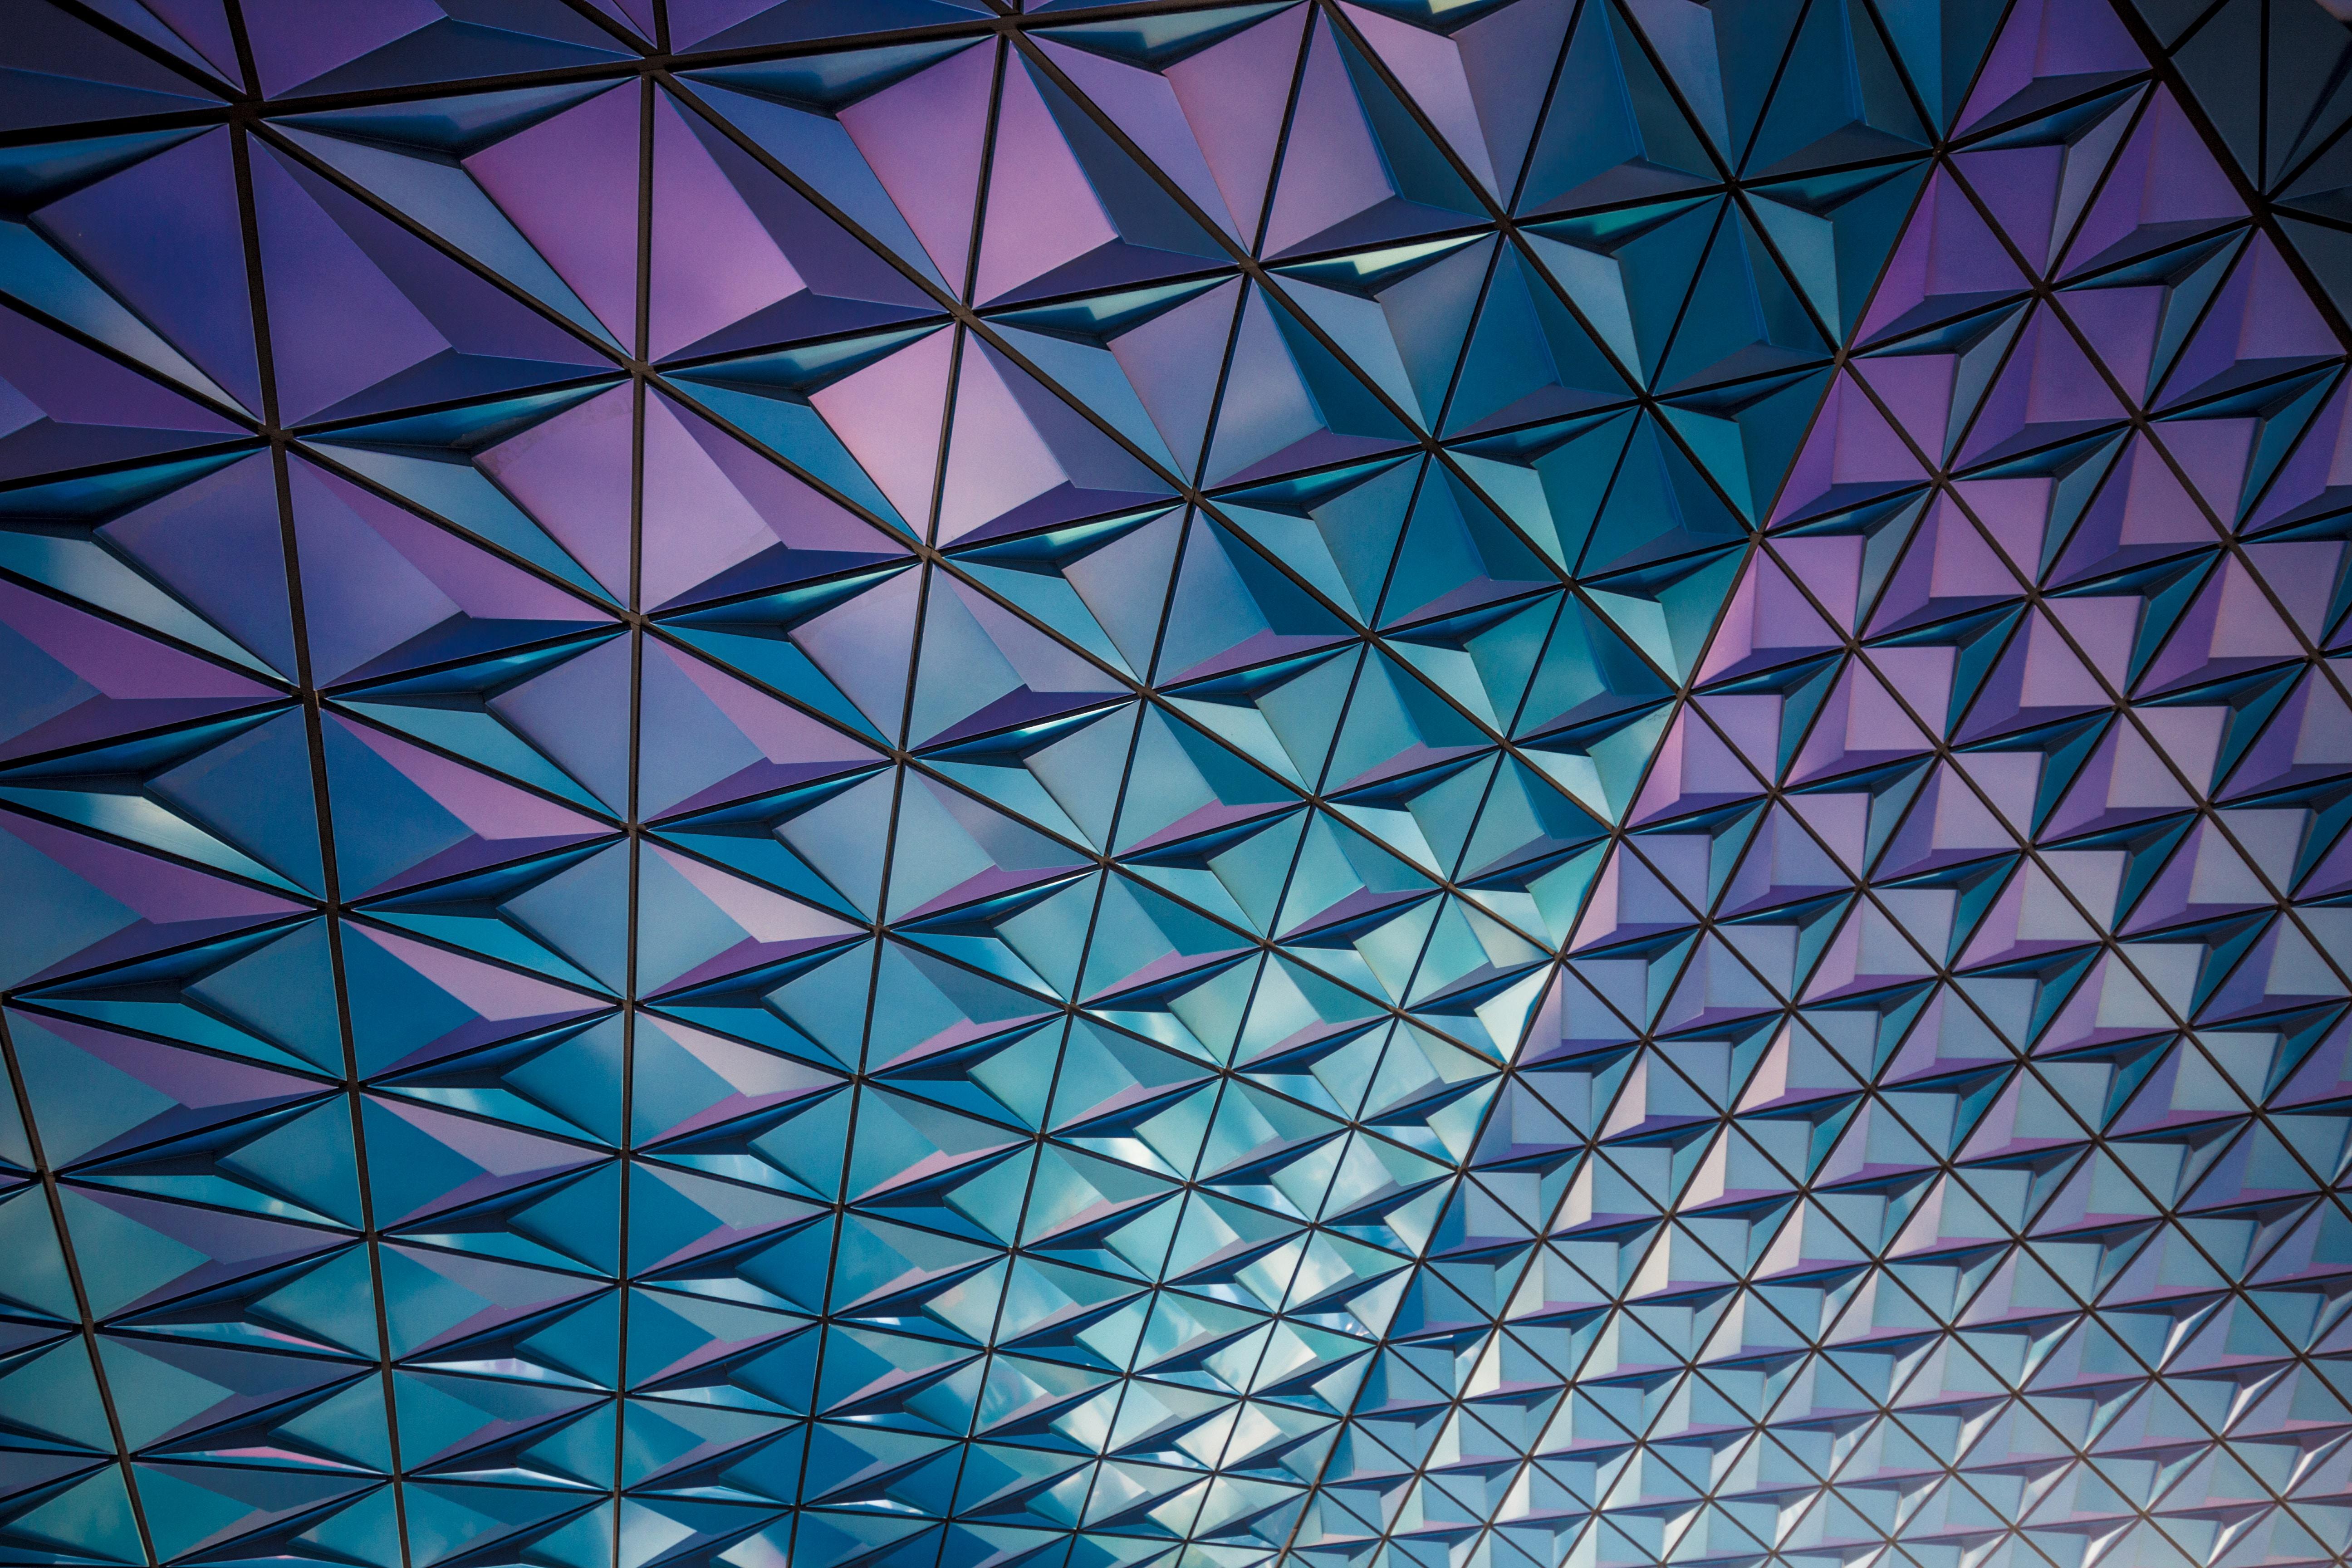 Days of Awesome Wallpaper: Geometric and Architectural Wallpaper